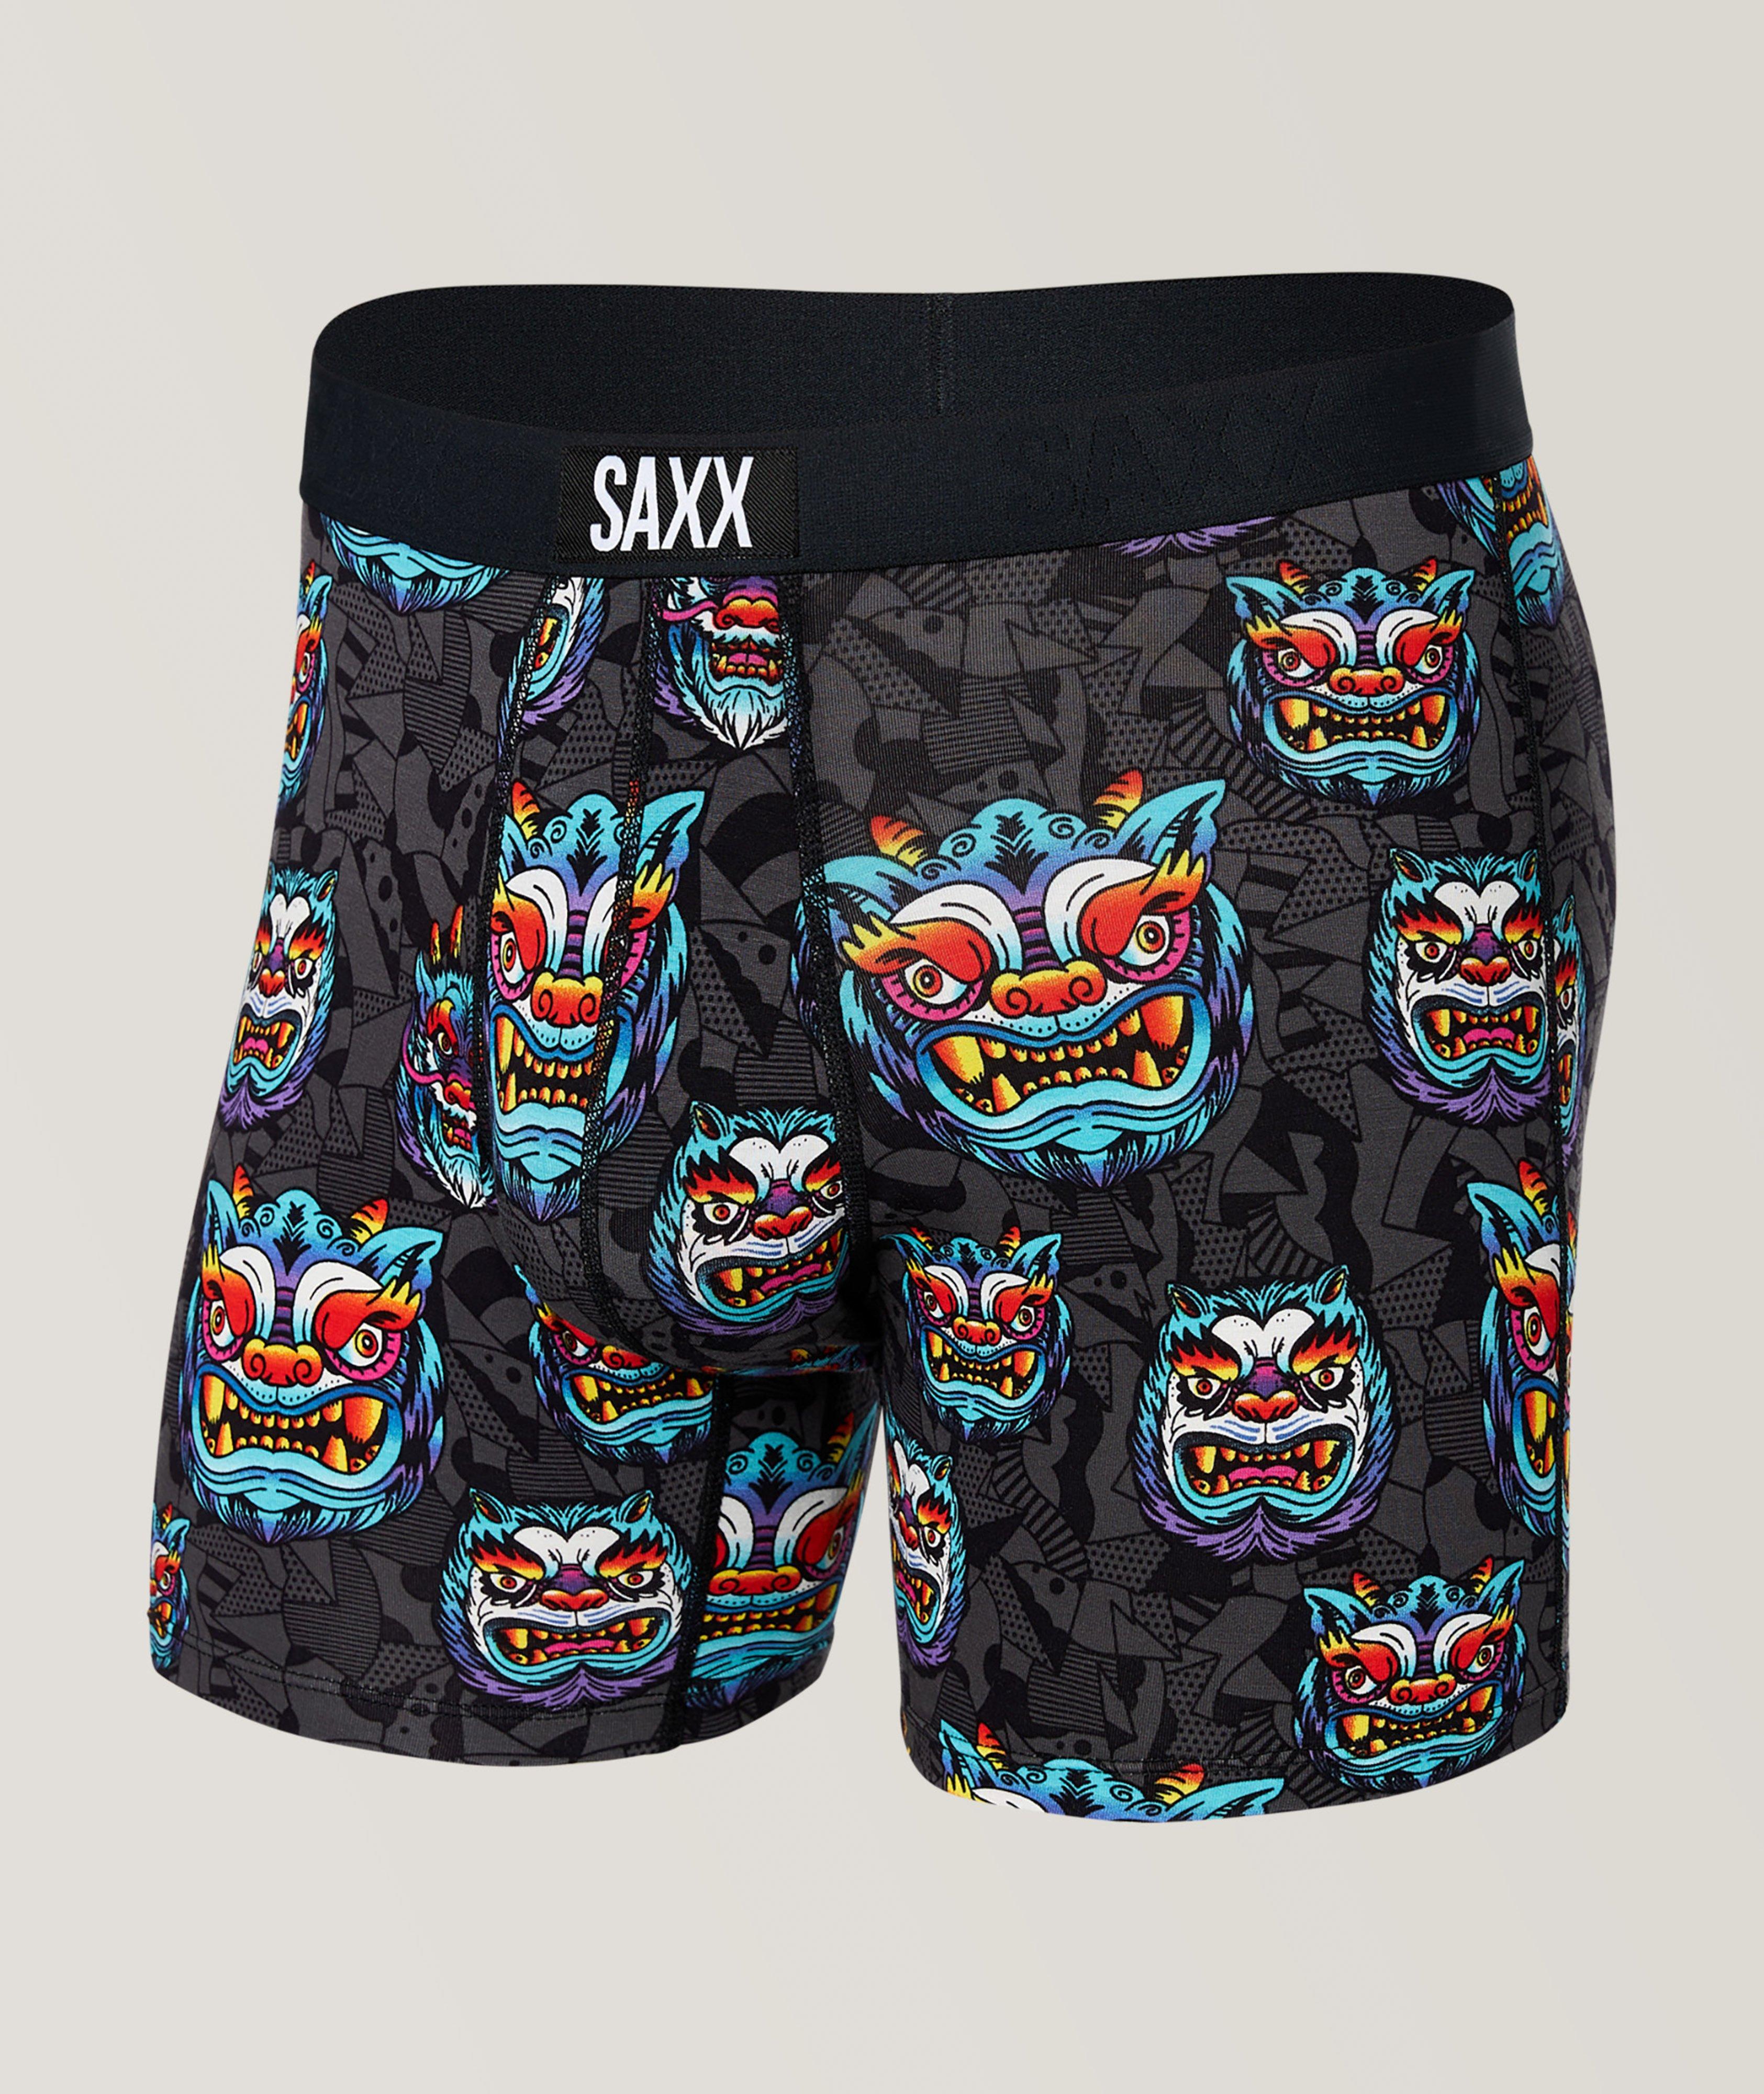 Saxx Underwear Ultra Super Soft Boxer Brief Fly, 5 Inseam - Mens - 5 Pack, FREE SHIPPING in Canada